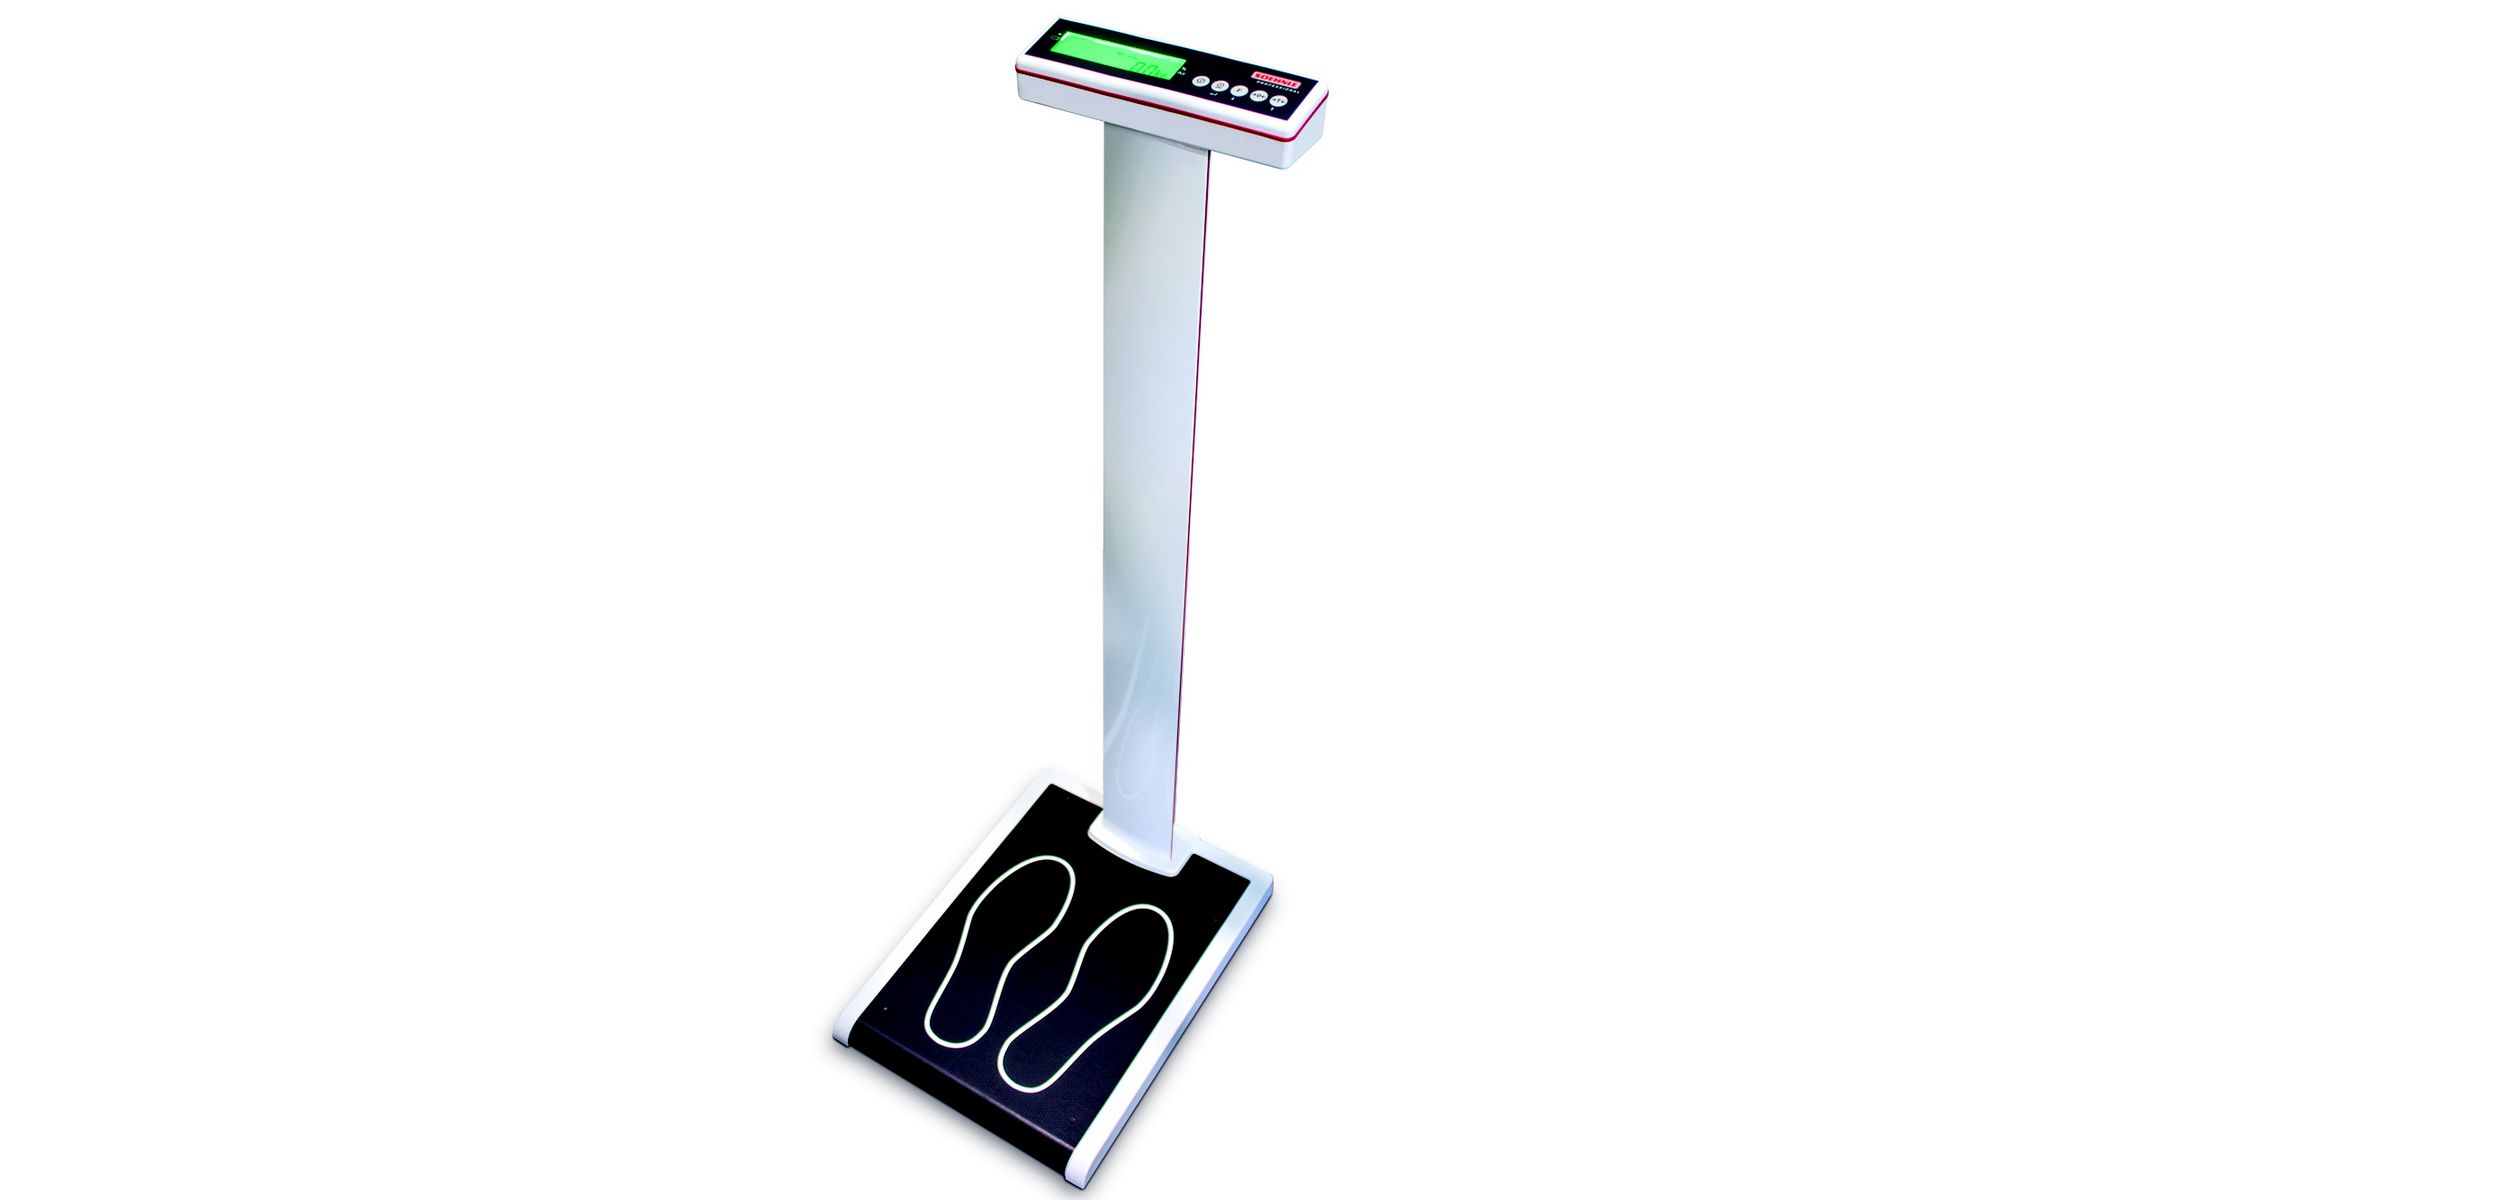 https://www.freseniusmedicalcare.com/fileadmin/data/masterContent/images/Healthcare_Professionals/10_Ancillary_products/03_Medical_scales/Soehnle-7730-column-scale-verified.jpg